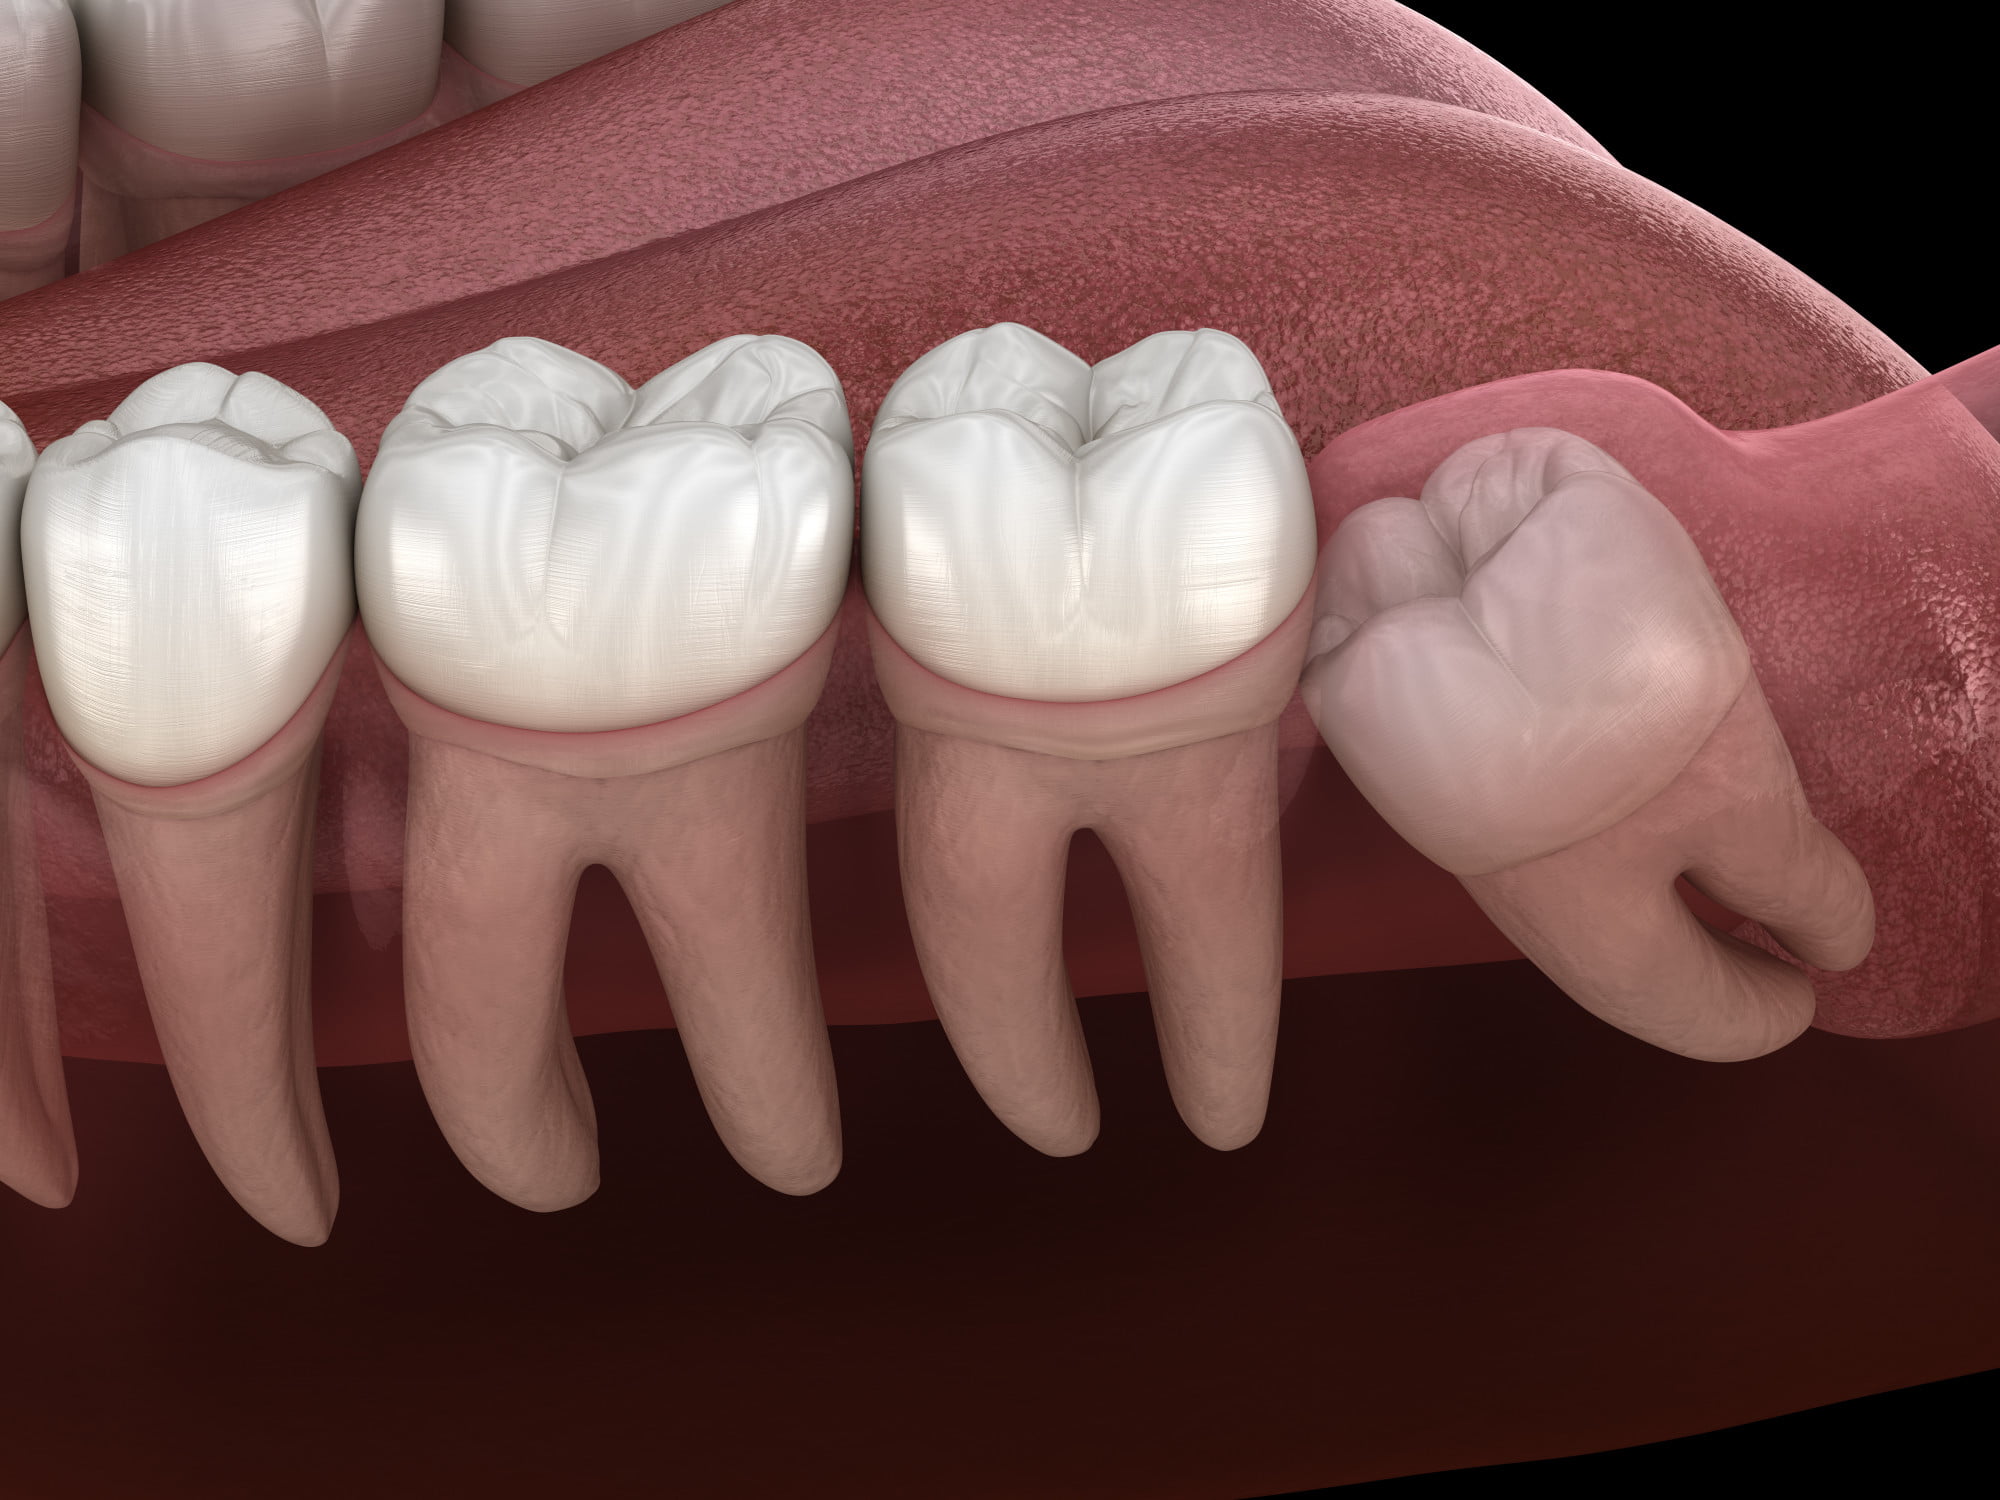 Are you getting ready to have your wisdom teeth removed? Here's everything you can expect from wisdom teeth removal surgery.